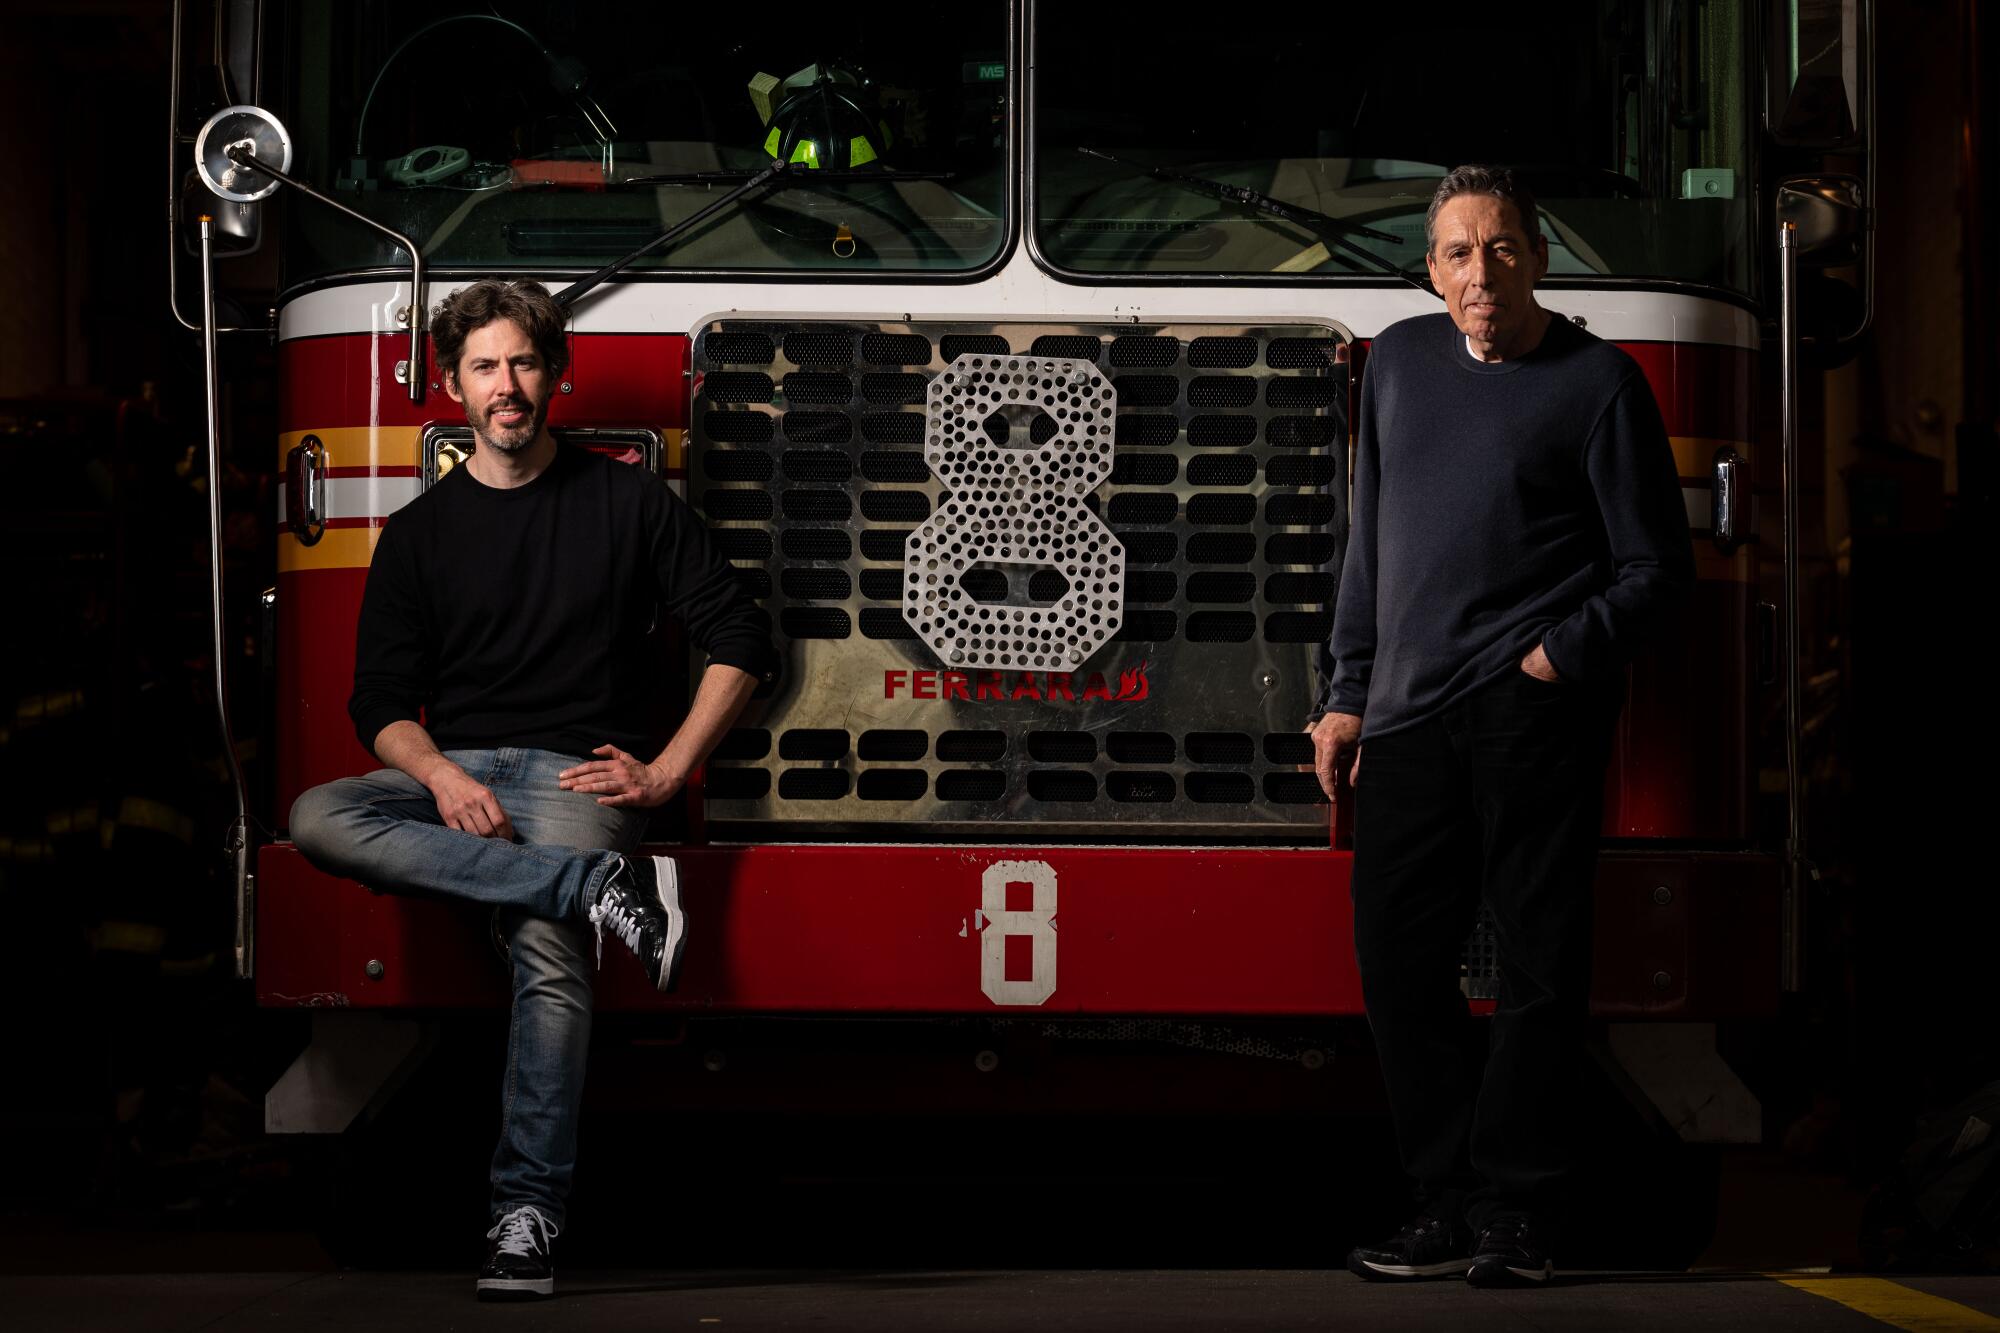 Two men pose in front of a fire truck.